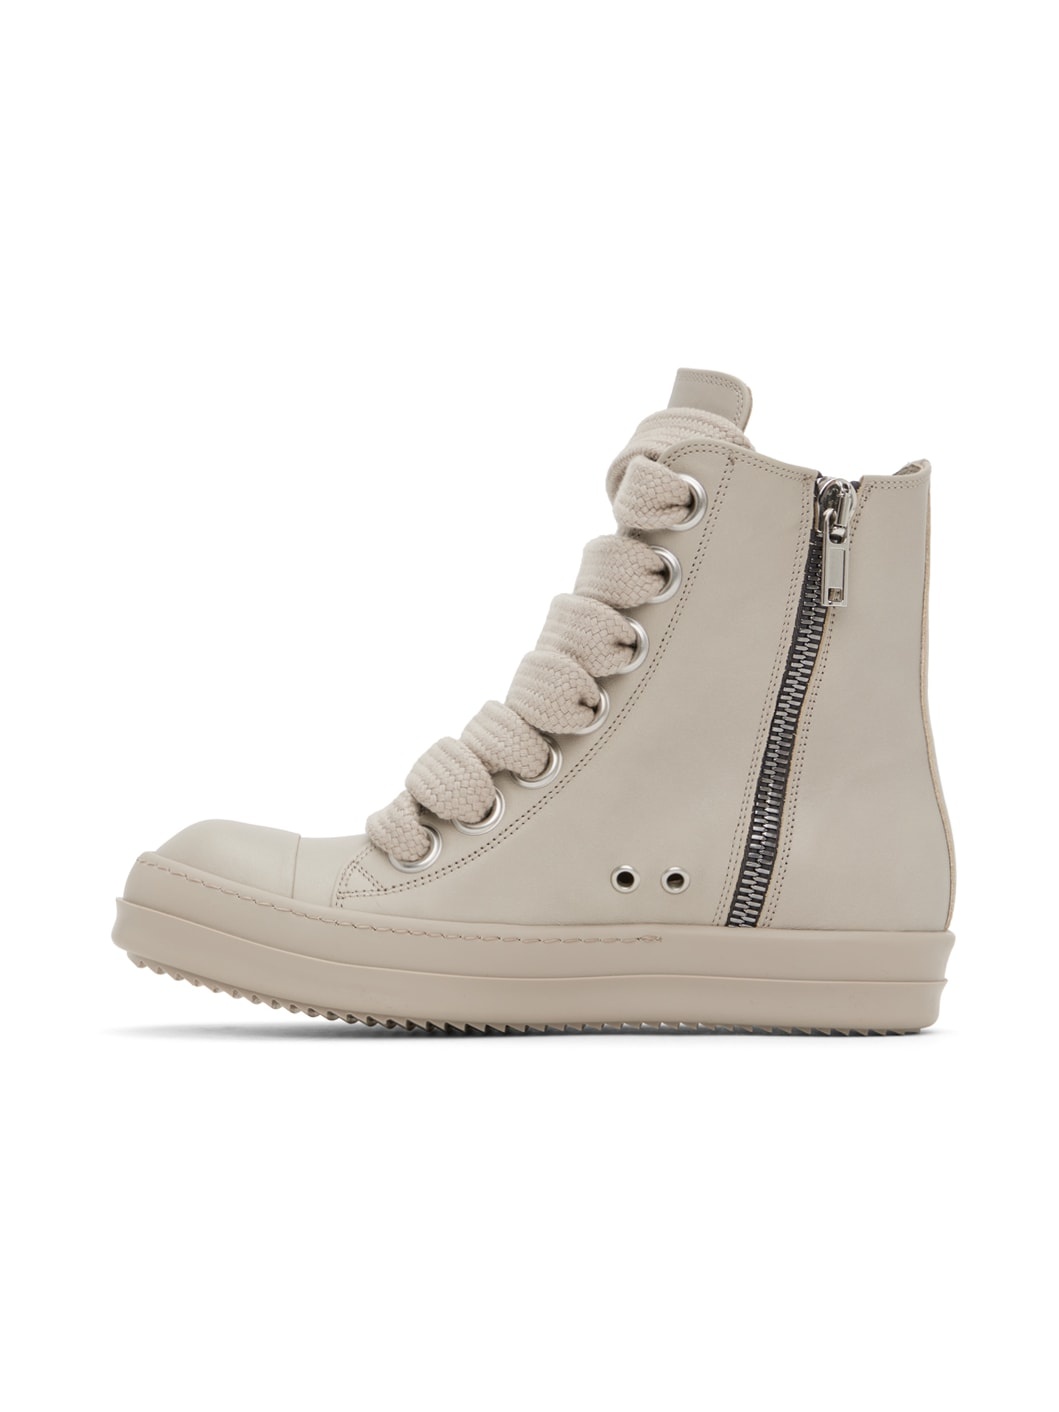 Off-White Washed Calf Sneakers - 3